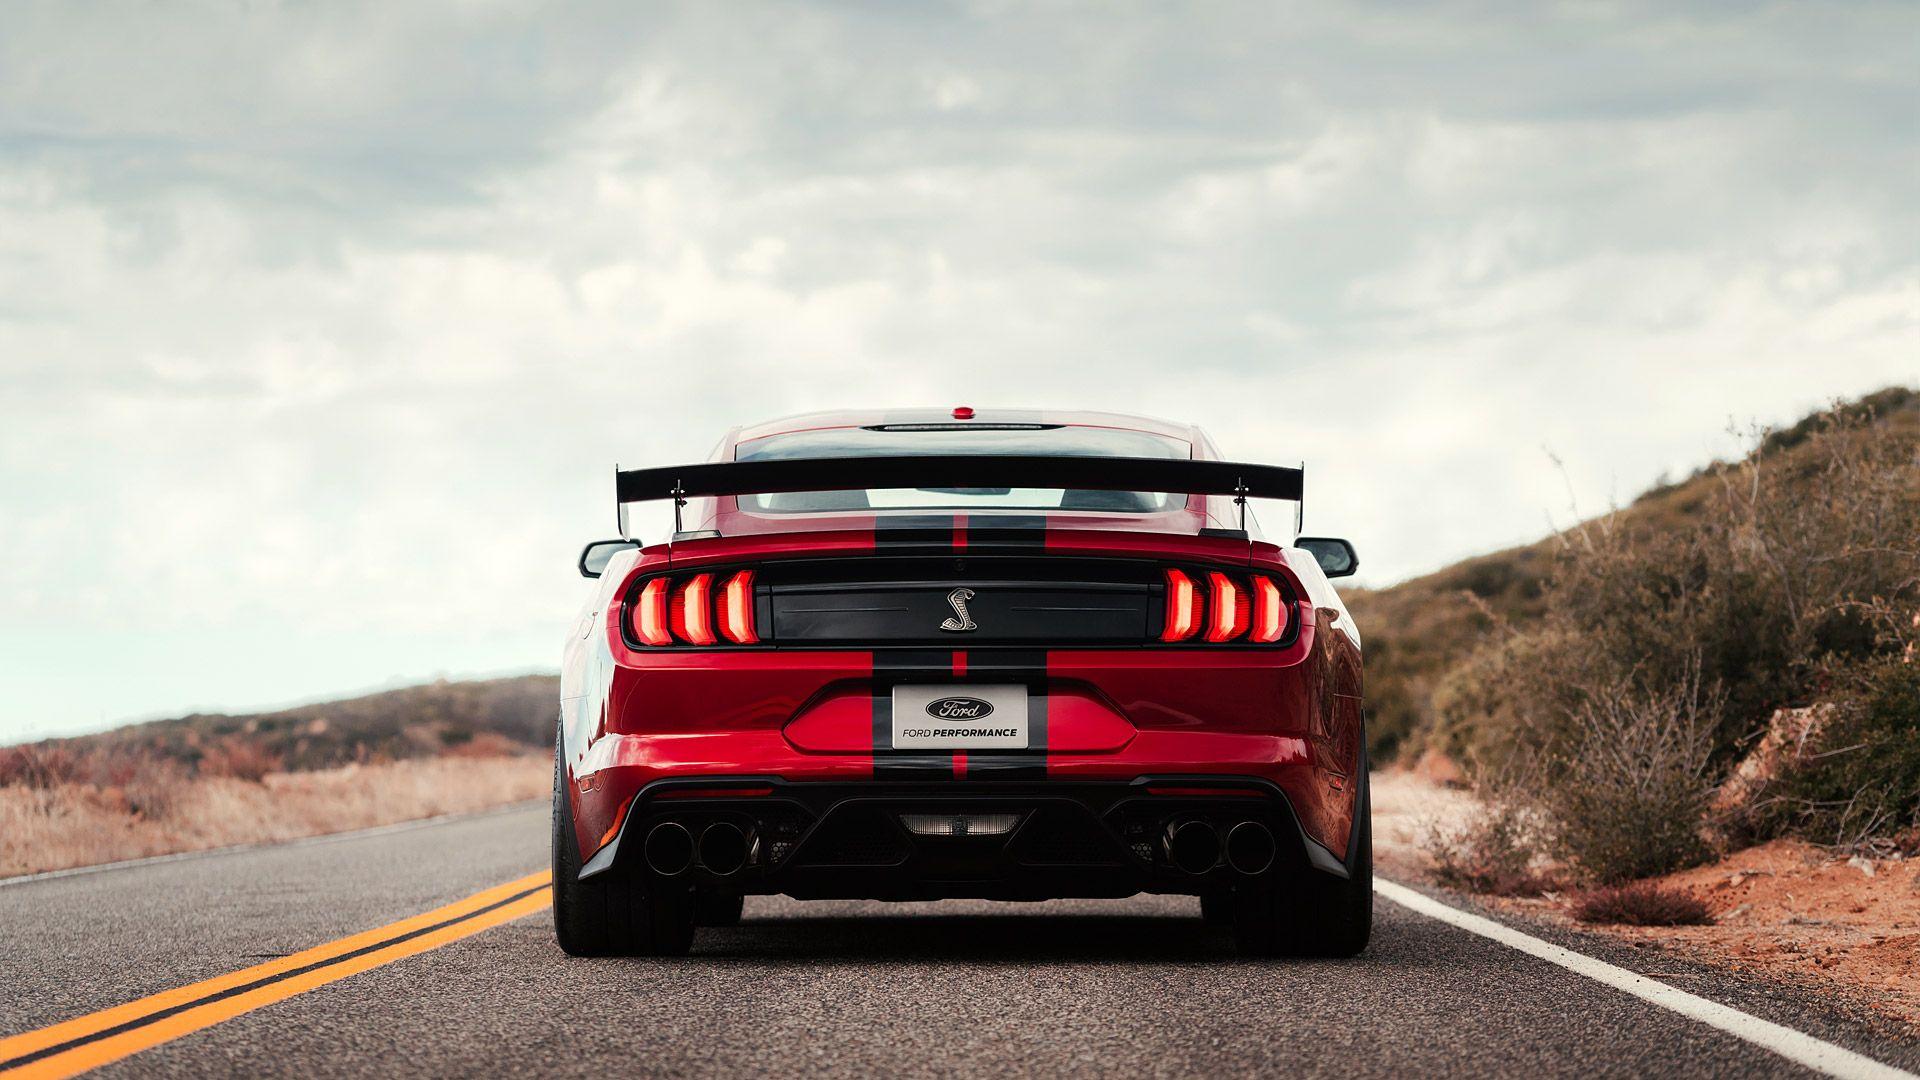 Ford Mustang Shelby GT500 Wallpapers